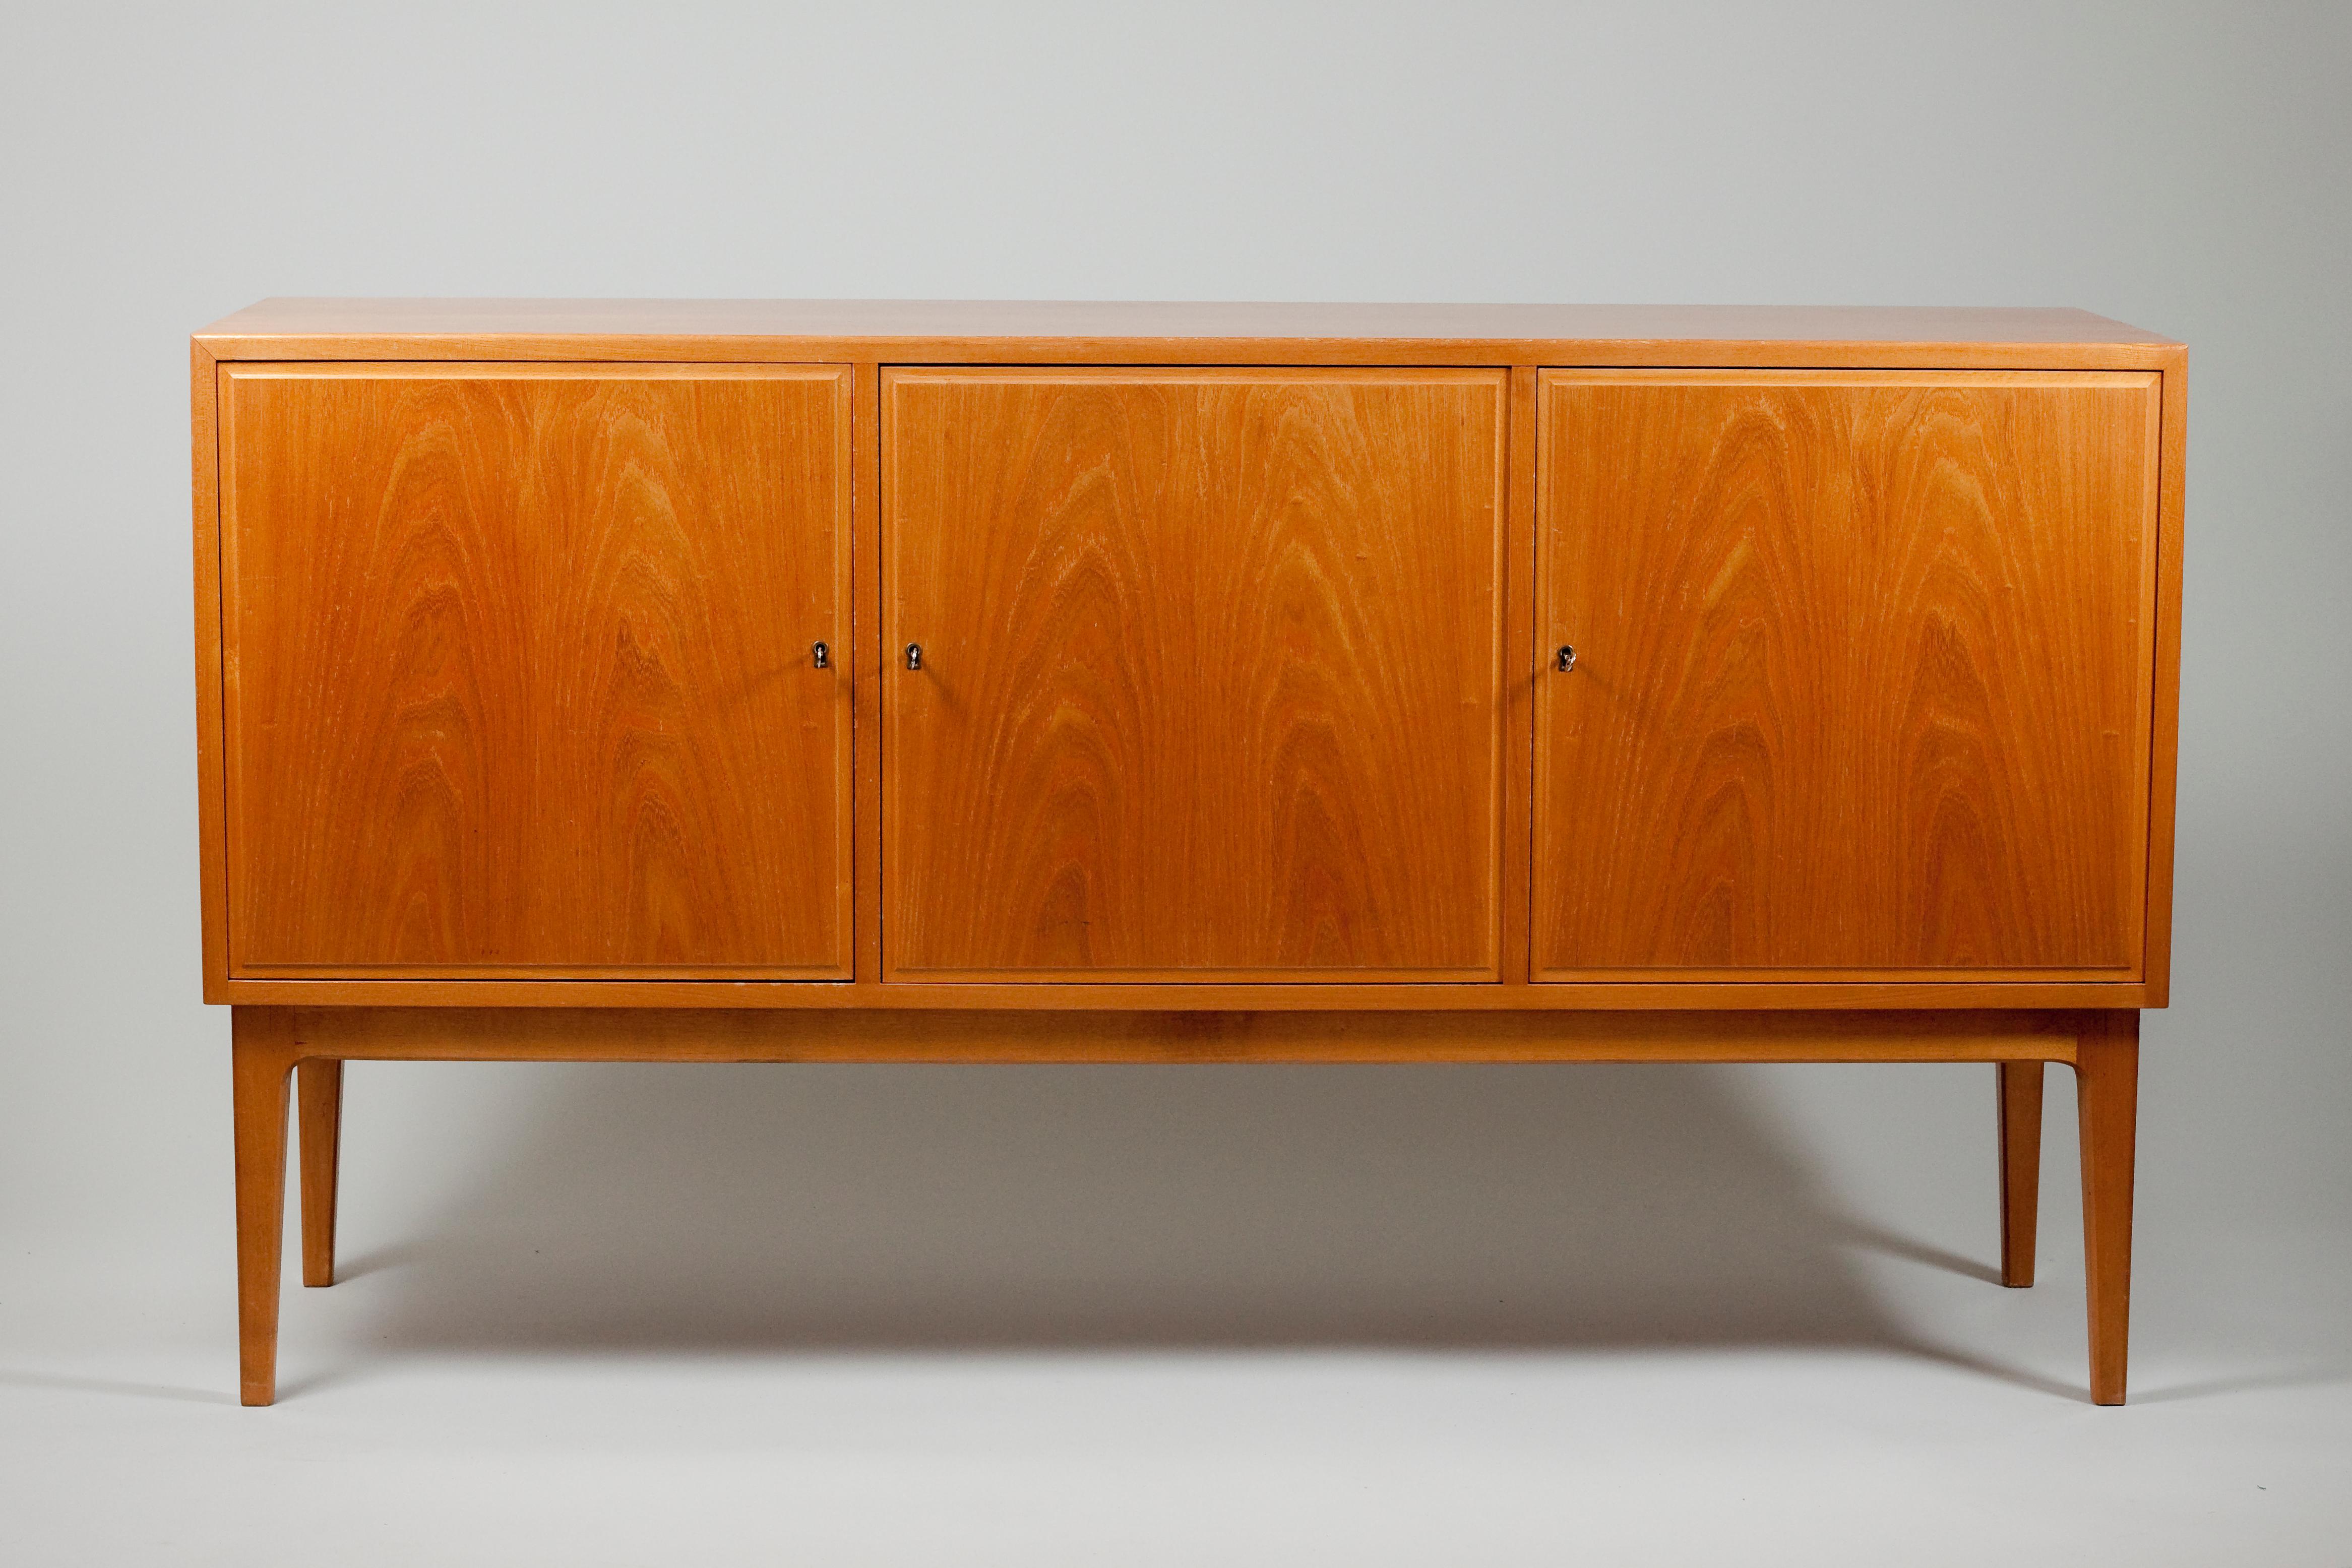 Beautiful ash large size sideboard made in Finland in the 1950s. The sideboard is well made and even the inside of the doors are laminated in the finest ash veneer. The inside is clean and in mint condition. Inside the sideboard there are two